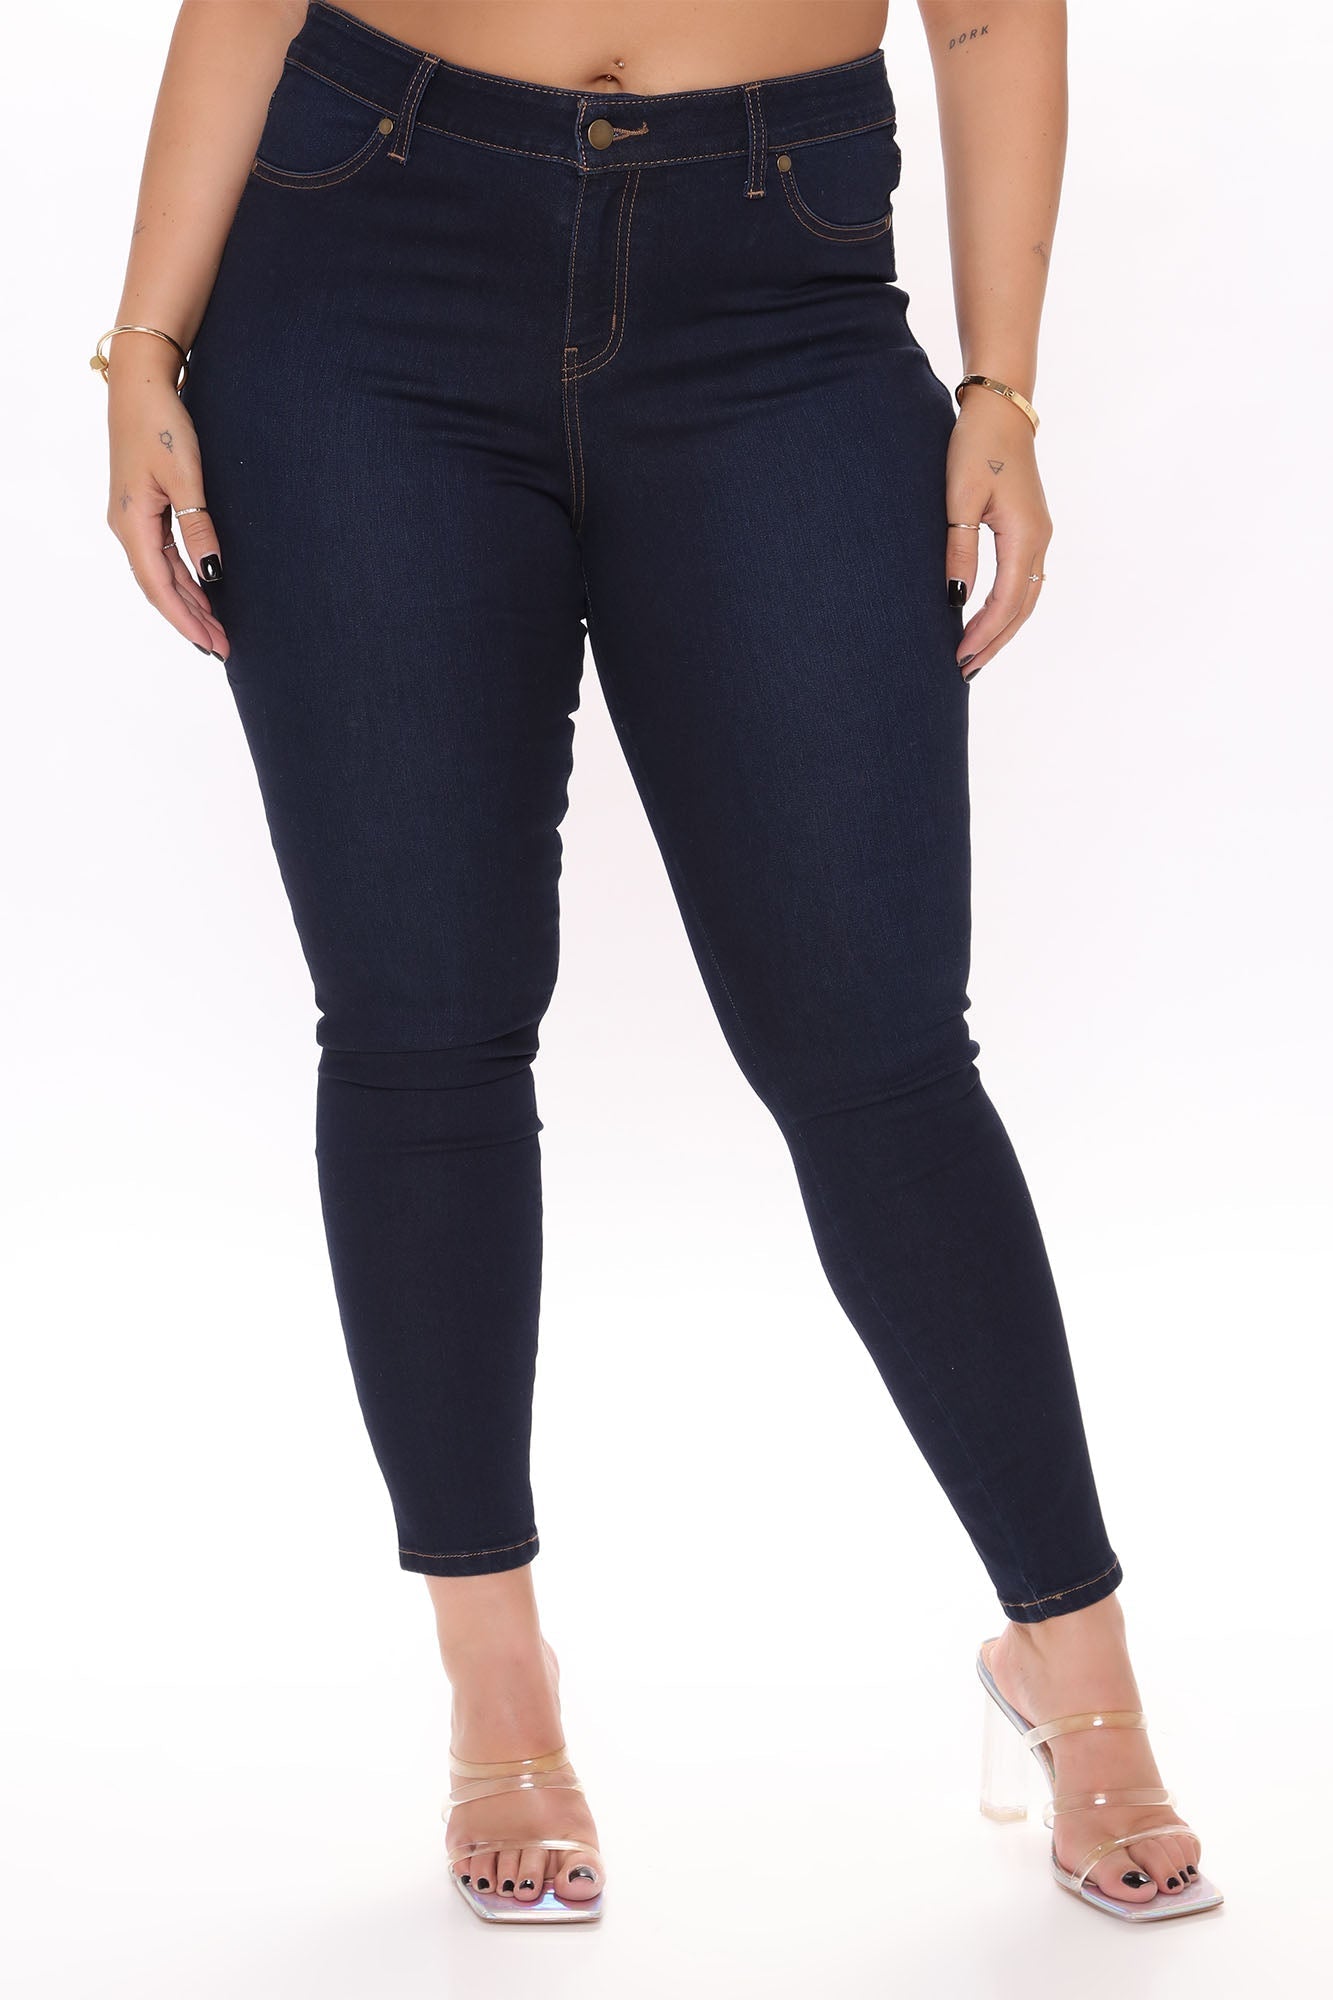 Flex Game Strong Low Rise Skinny Jeans - Dark Blue Wash